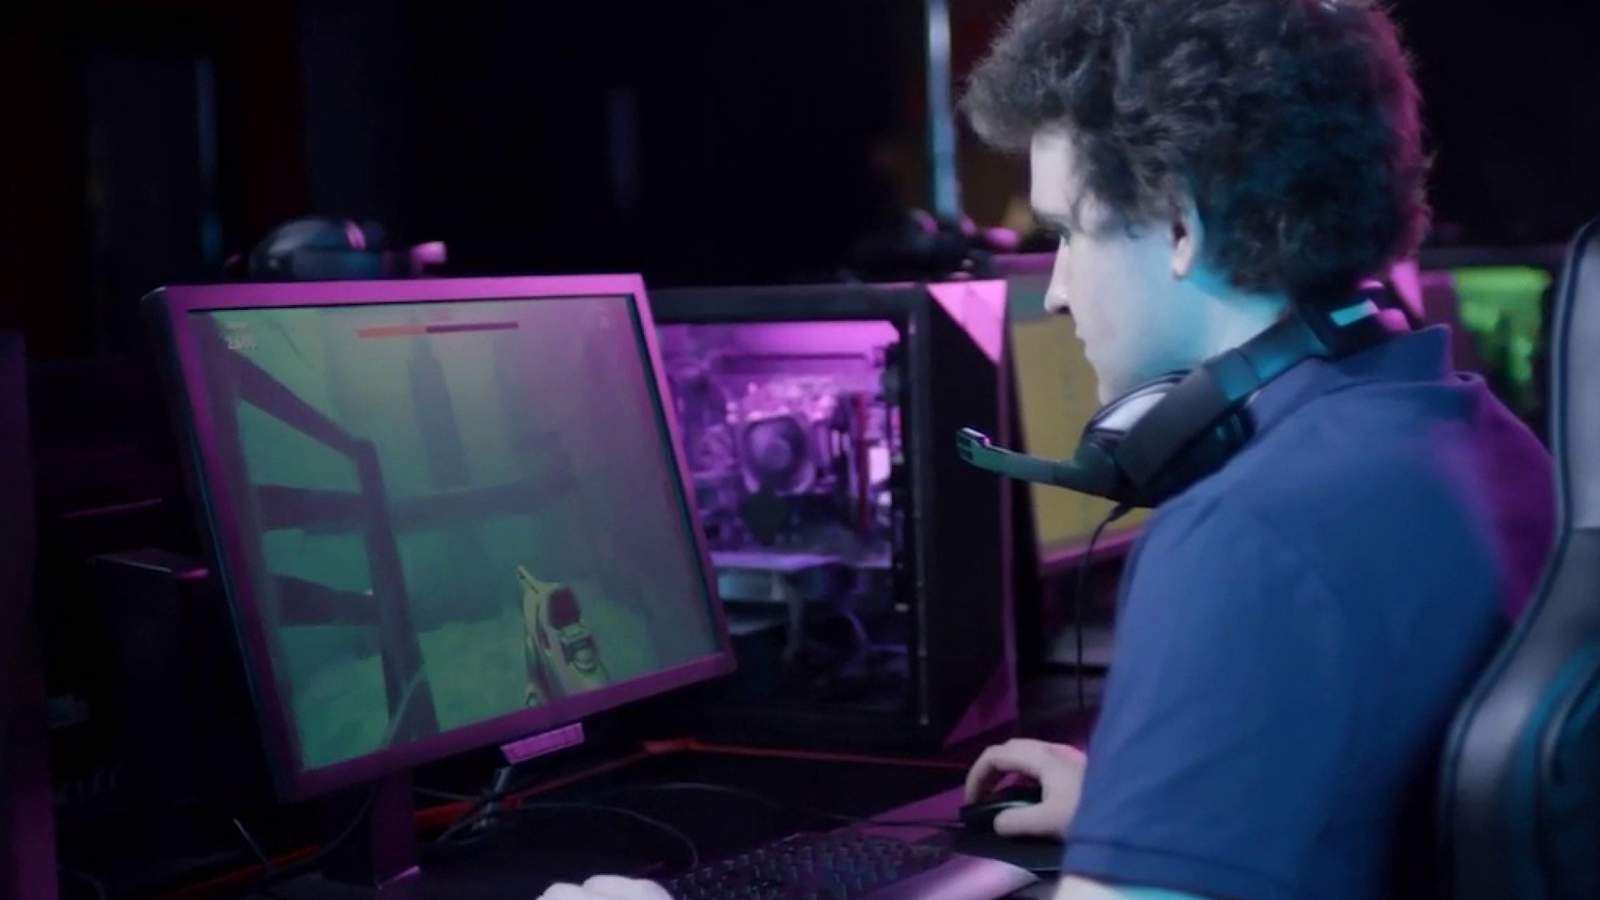 Esports gamers are healthier than the general population, experts say